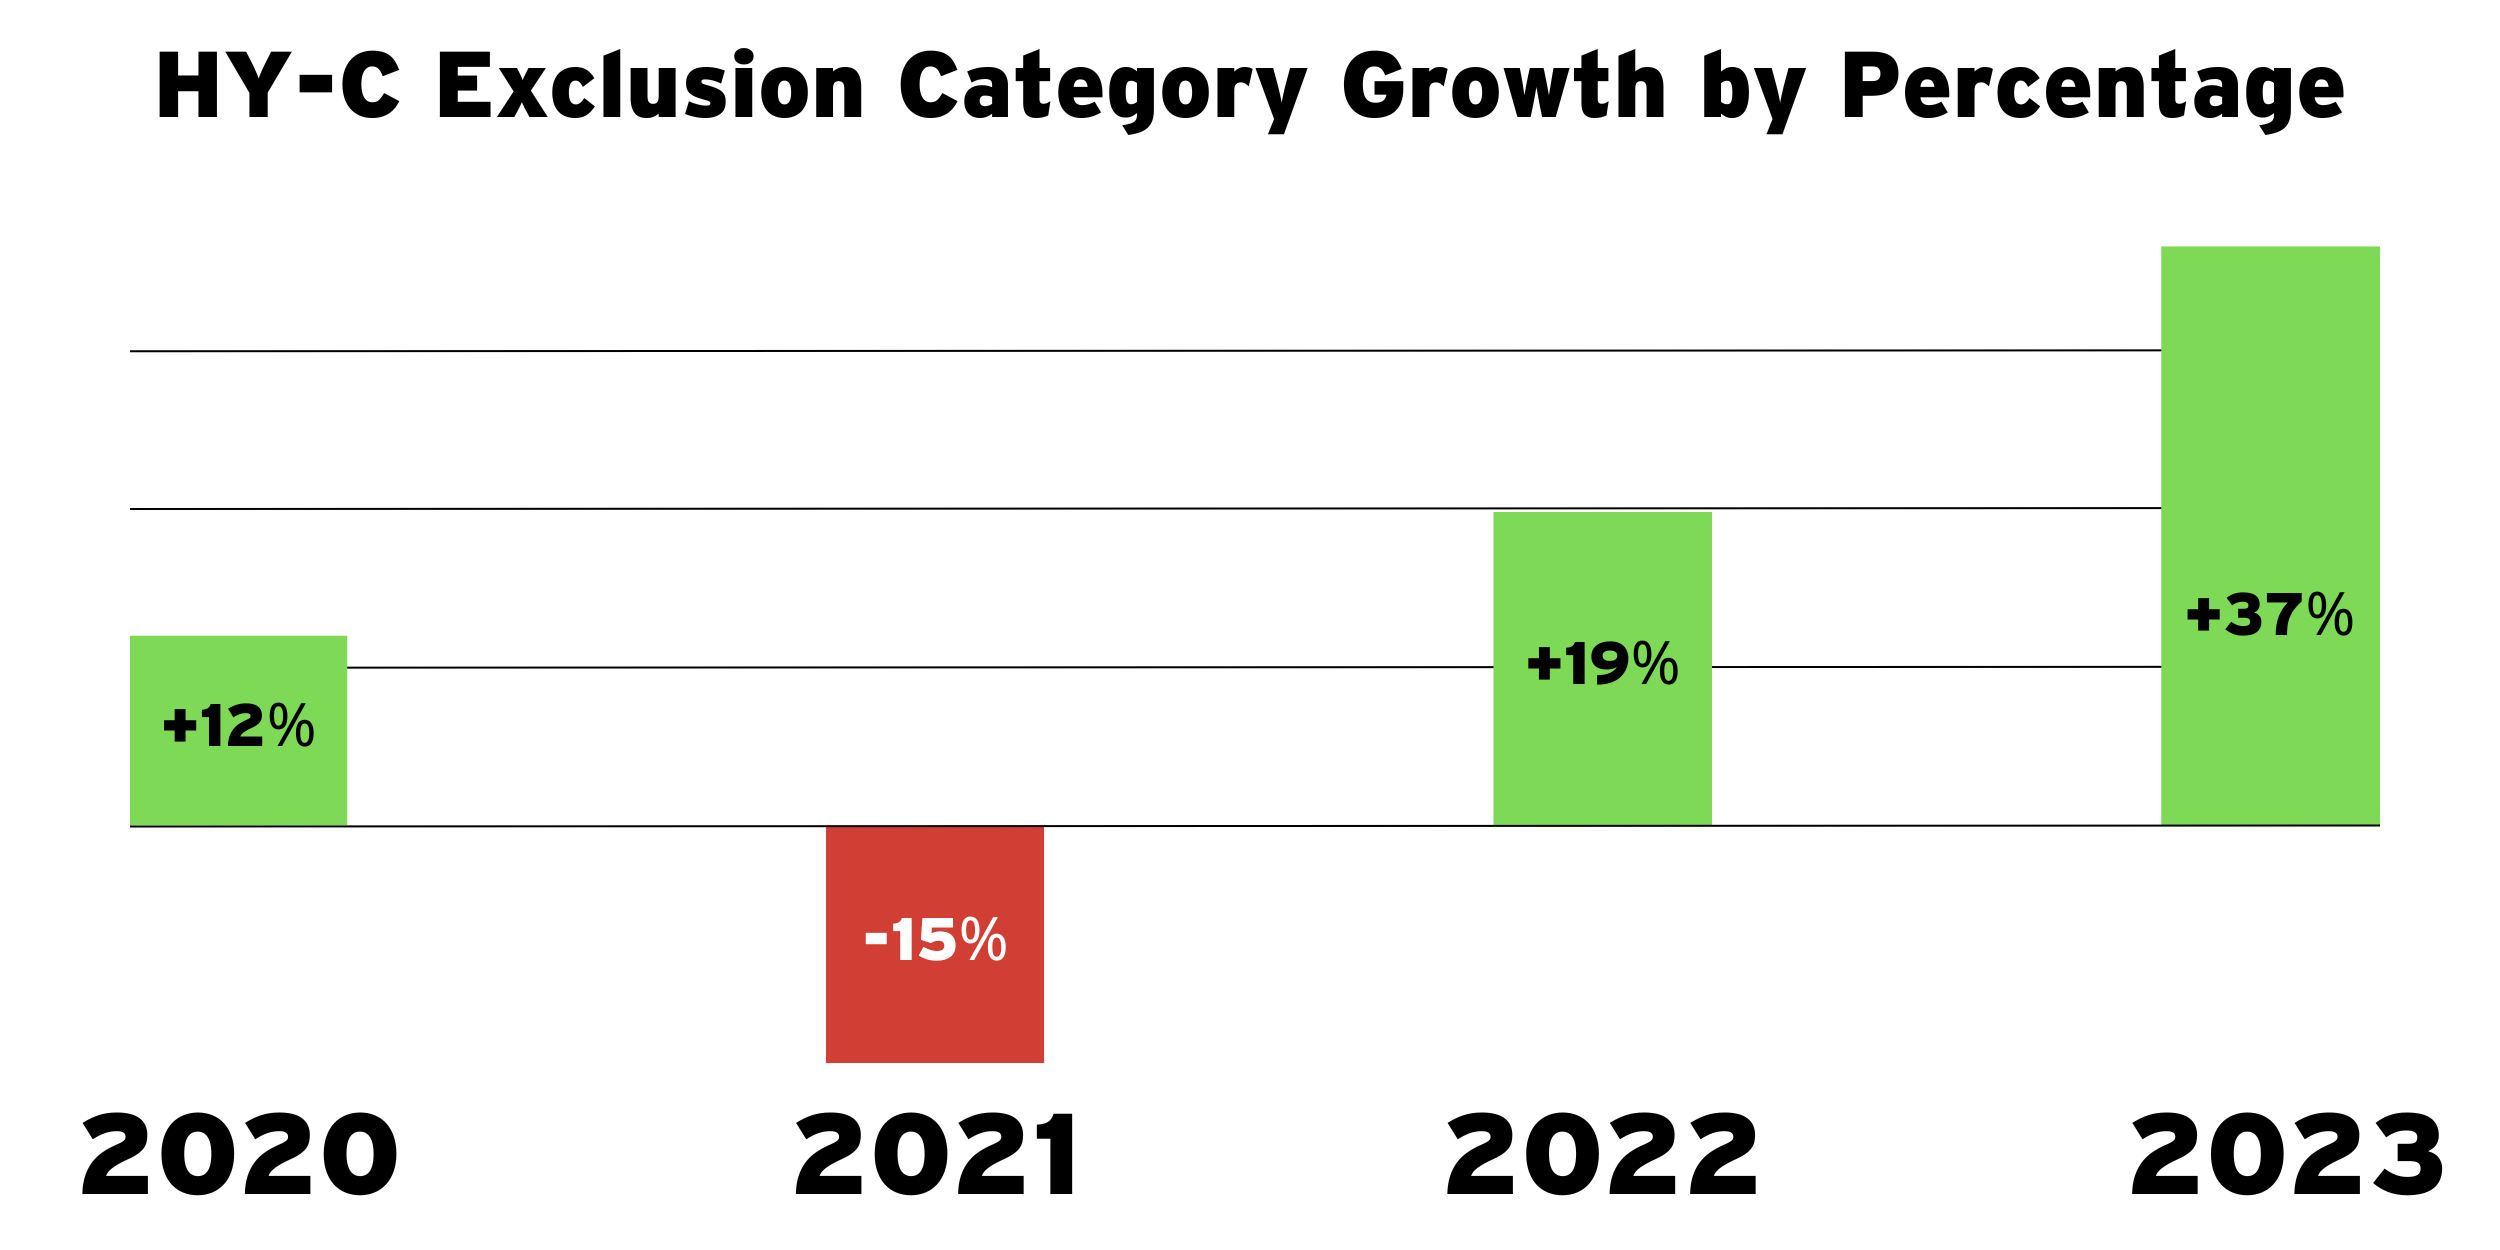 A chart showing the exclusion category performance for the HY-C company from 2020 to 2023.